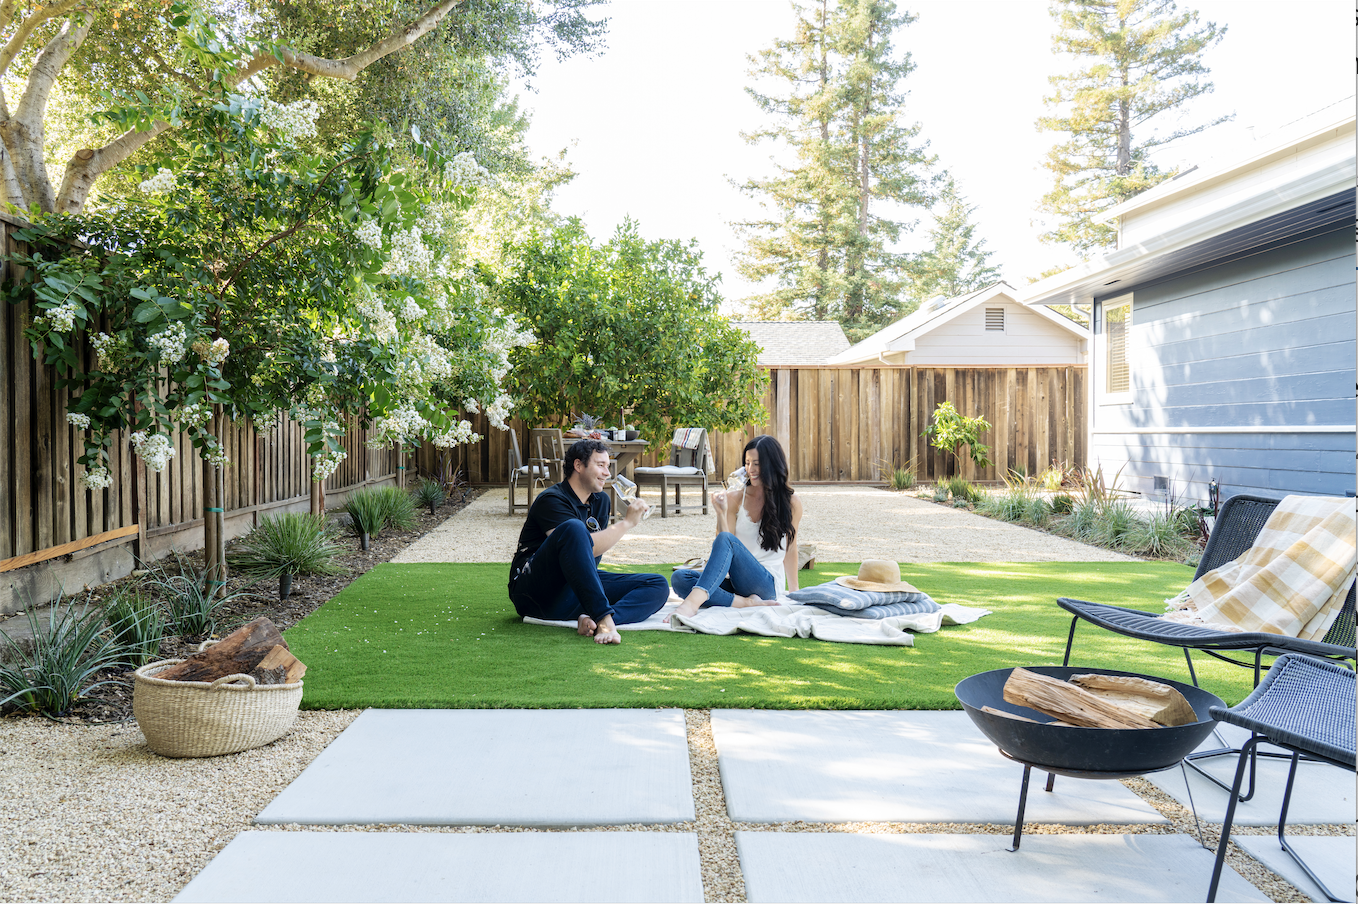 This Yardzen backyard utilizes several lawn replacements, including turf, mulch, gravel, and pavers.